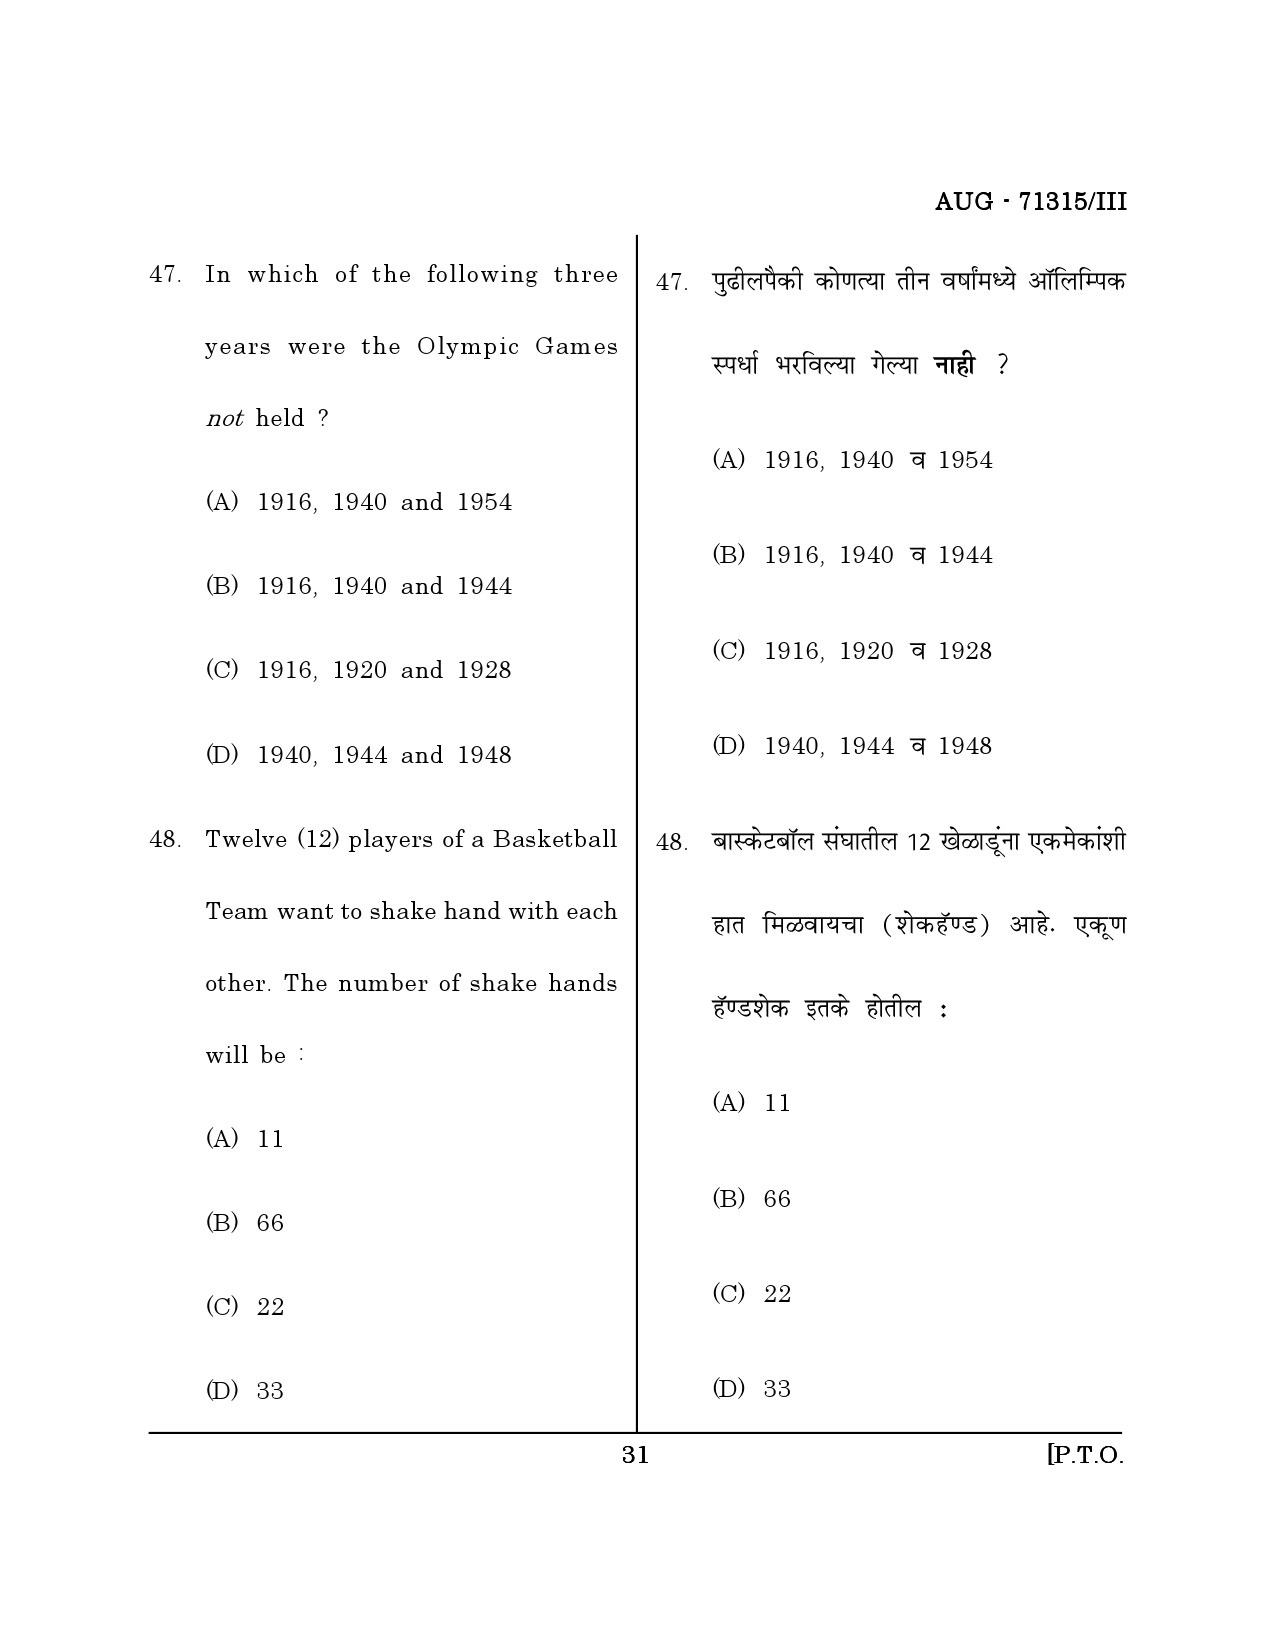 Maharashtra SET Physical Education Question Paper III August 2015 30